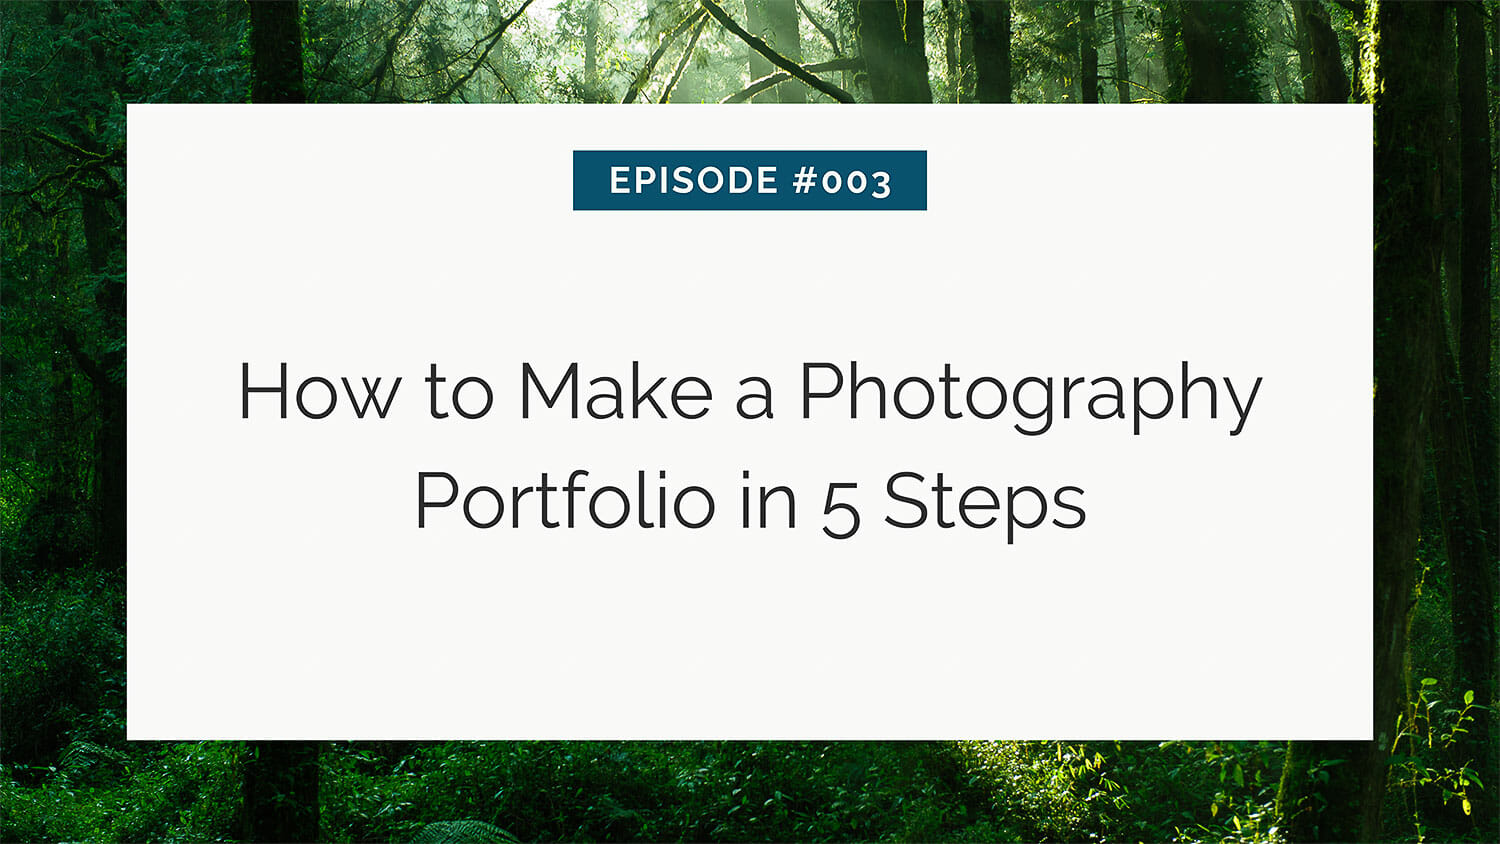 How to Create a Writing Portfolio That'll Wow Potential Clients